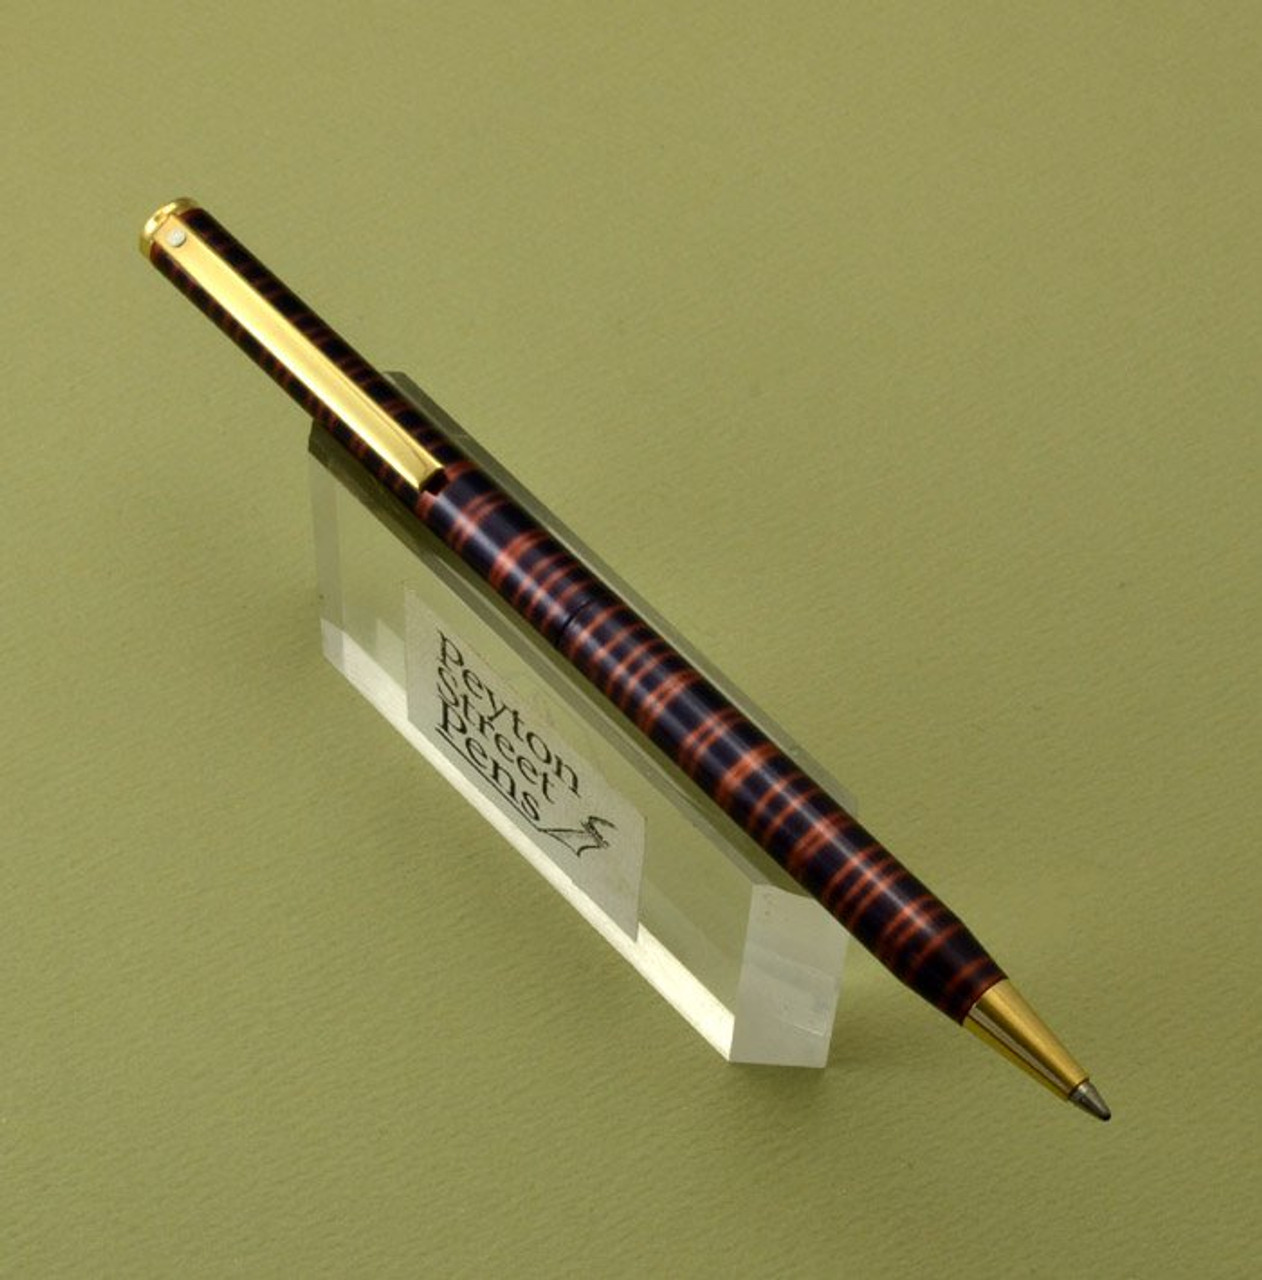 Sheaffer Fashoin Ballpoint Pen - Ringed/Striped with Gold Trim (Mint)